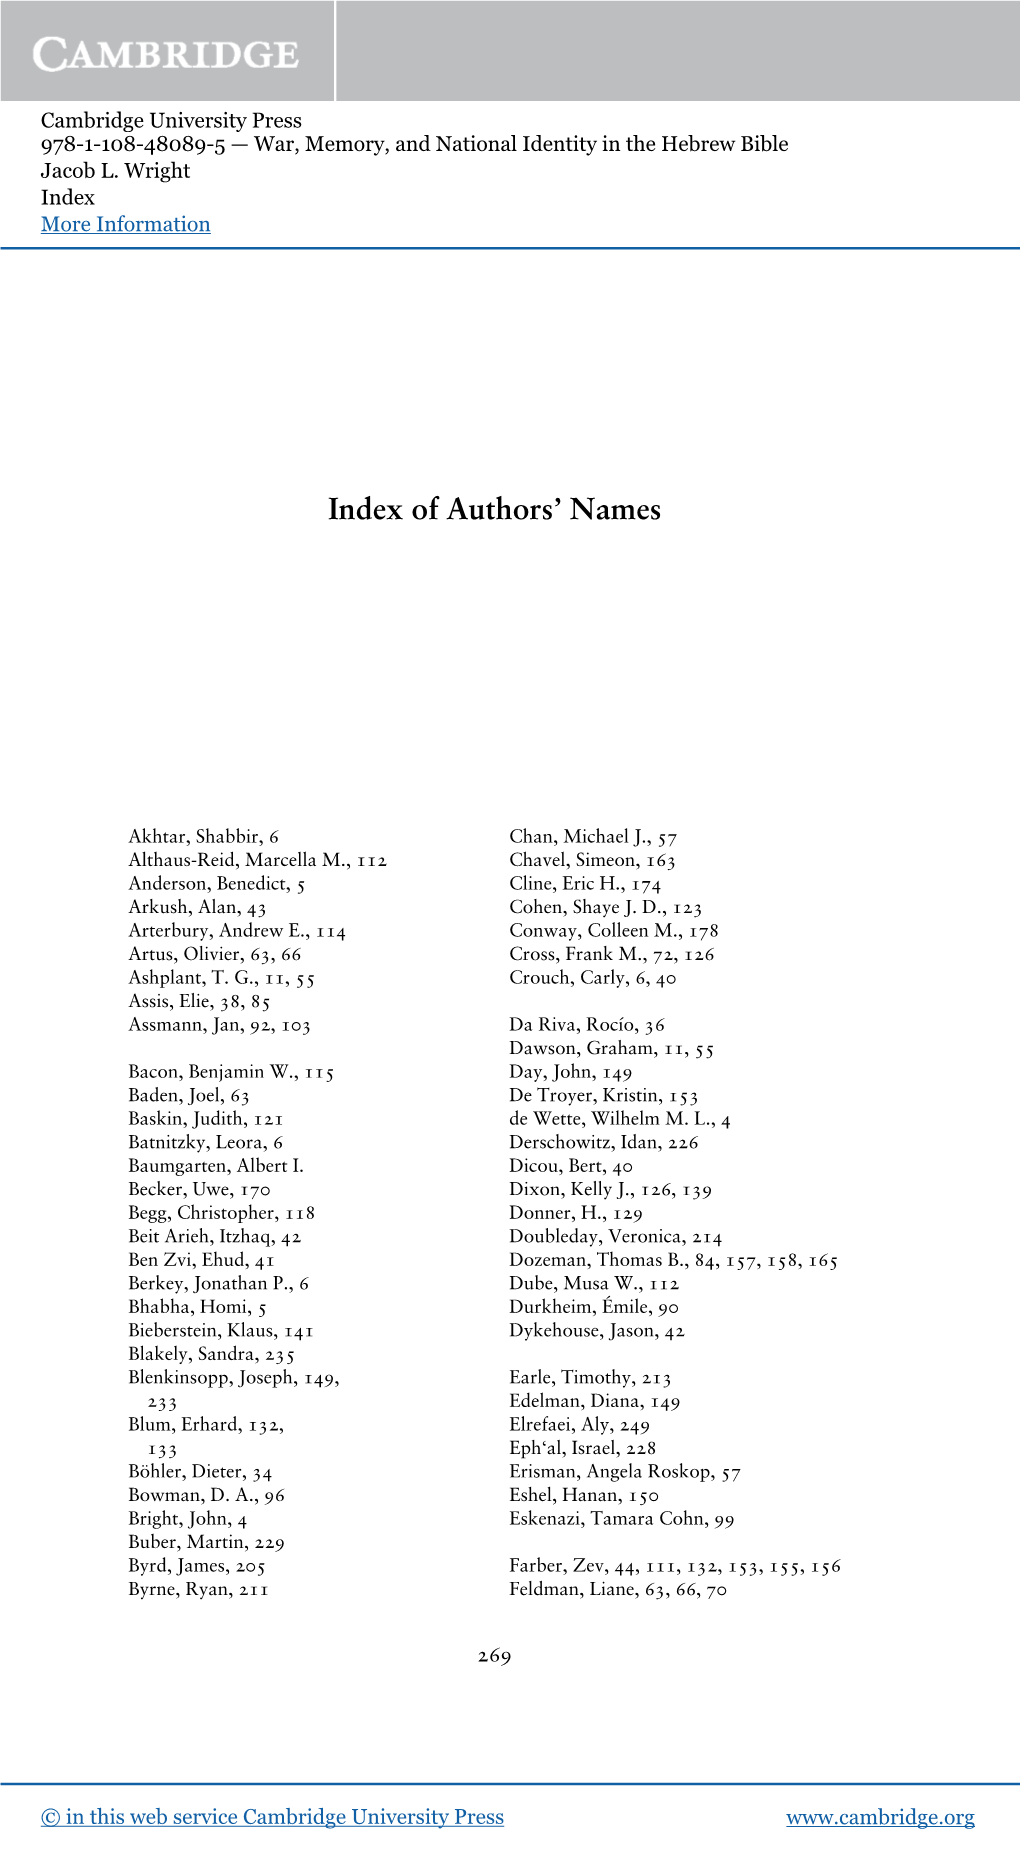 Index of Authors' Names